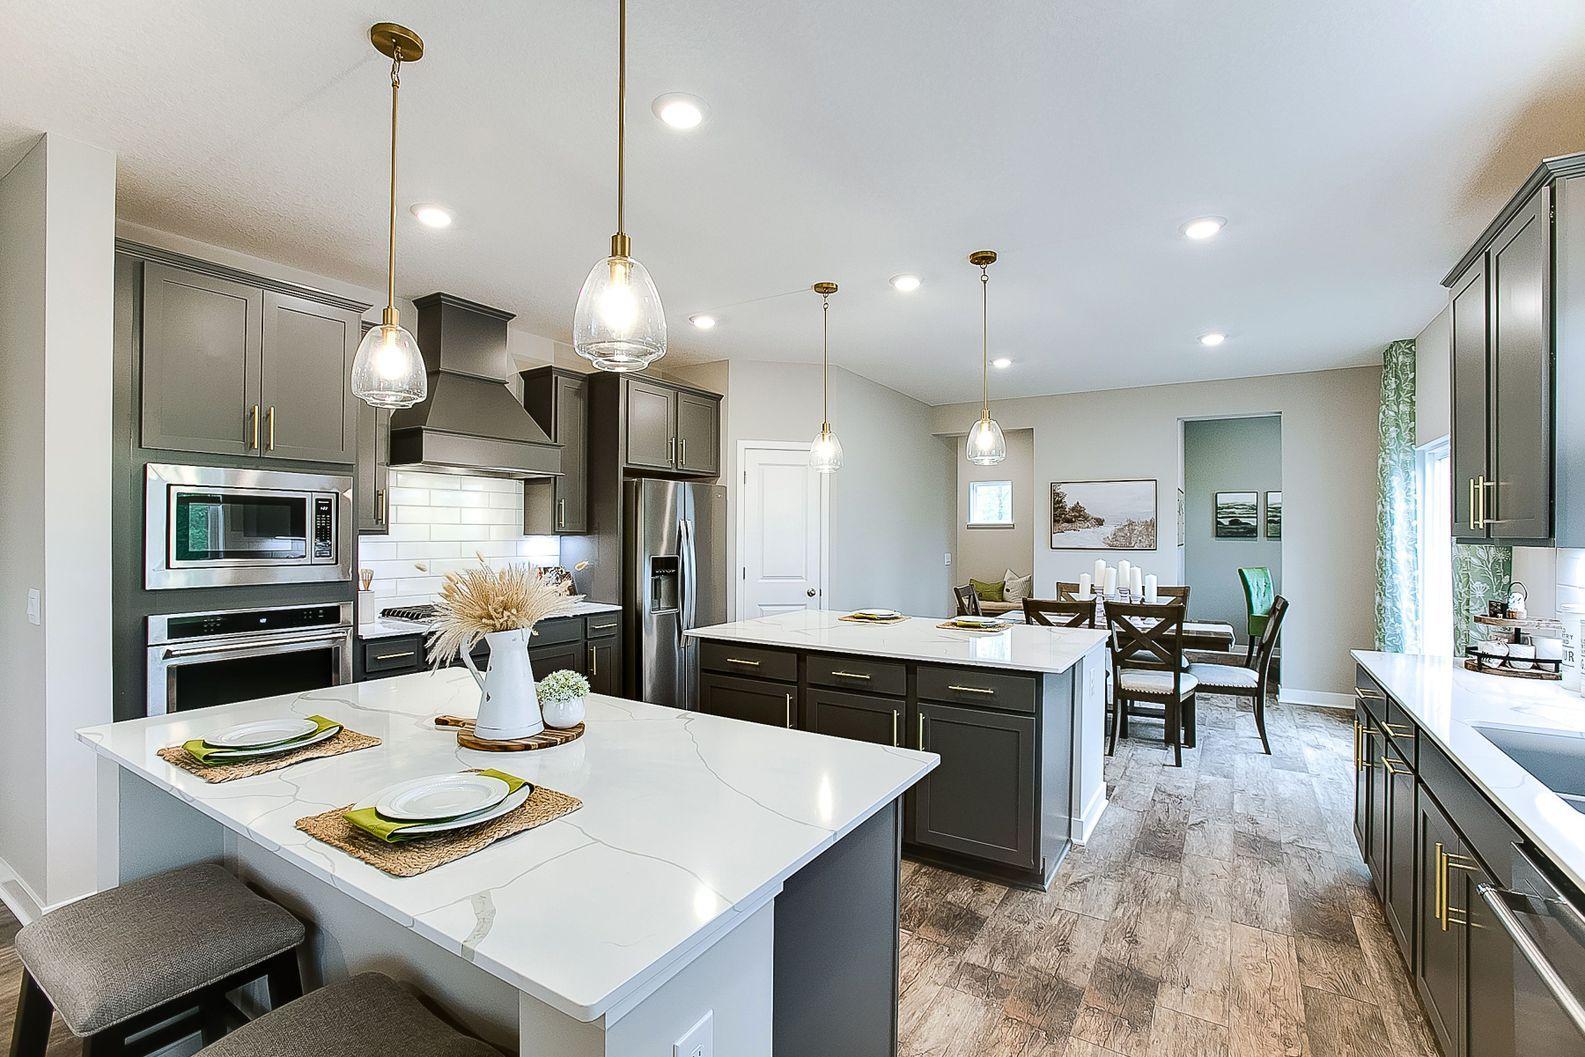 Welcome to our Redwood model in Chaska's newest must live in community, OAK CREEK! This is a must see floorplan as well as the many others that are offered within the community.